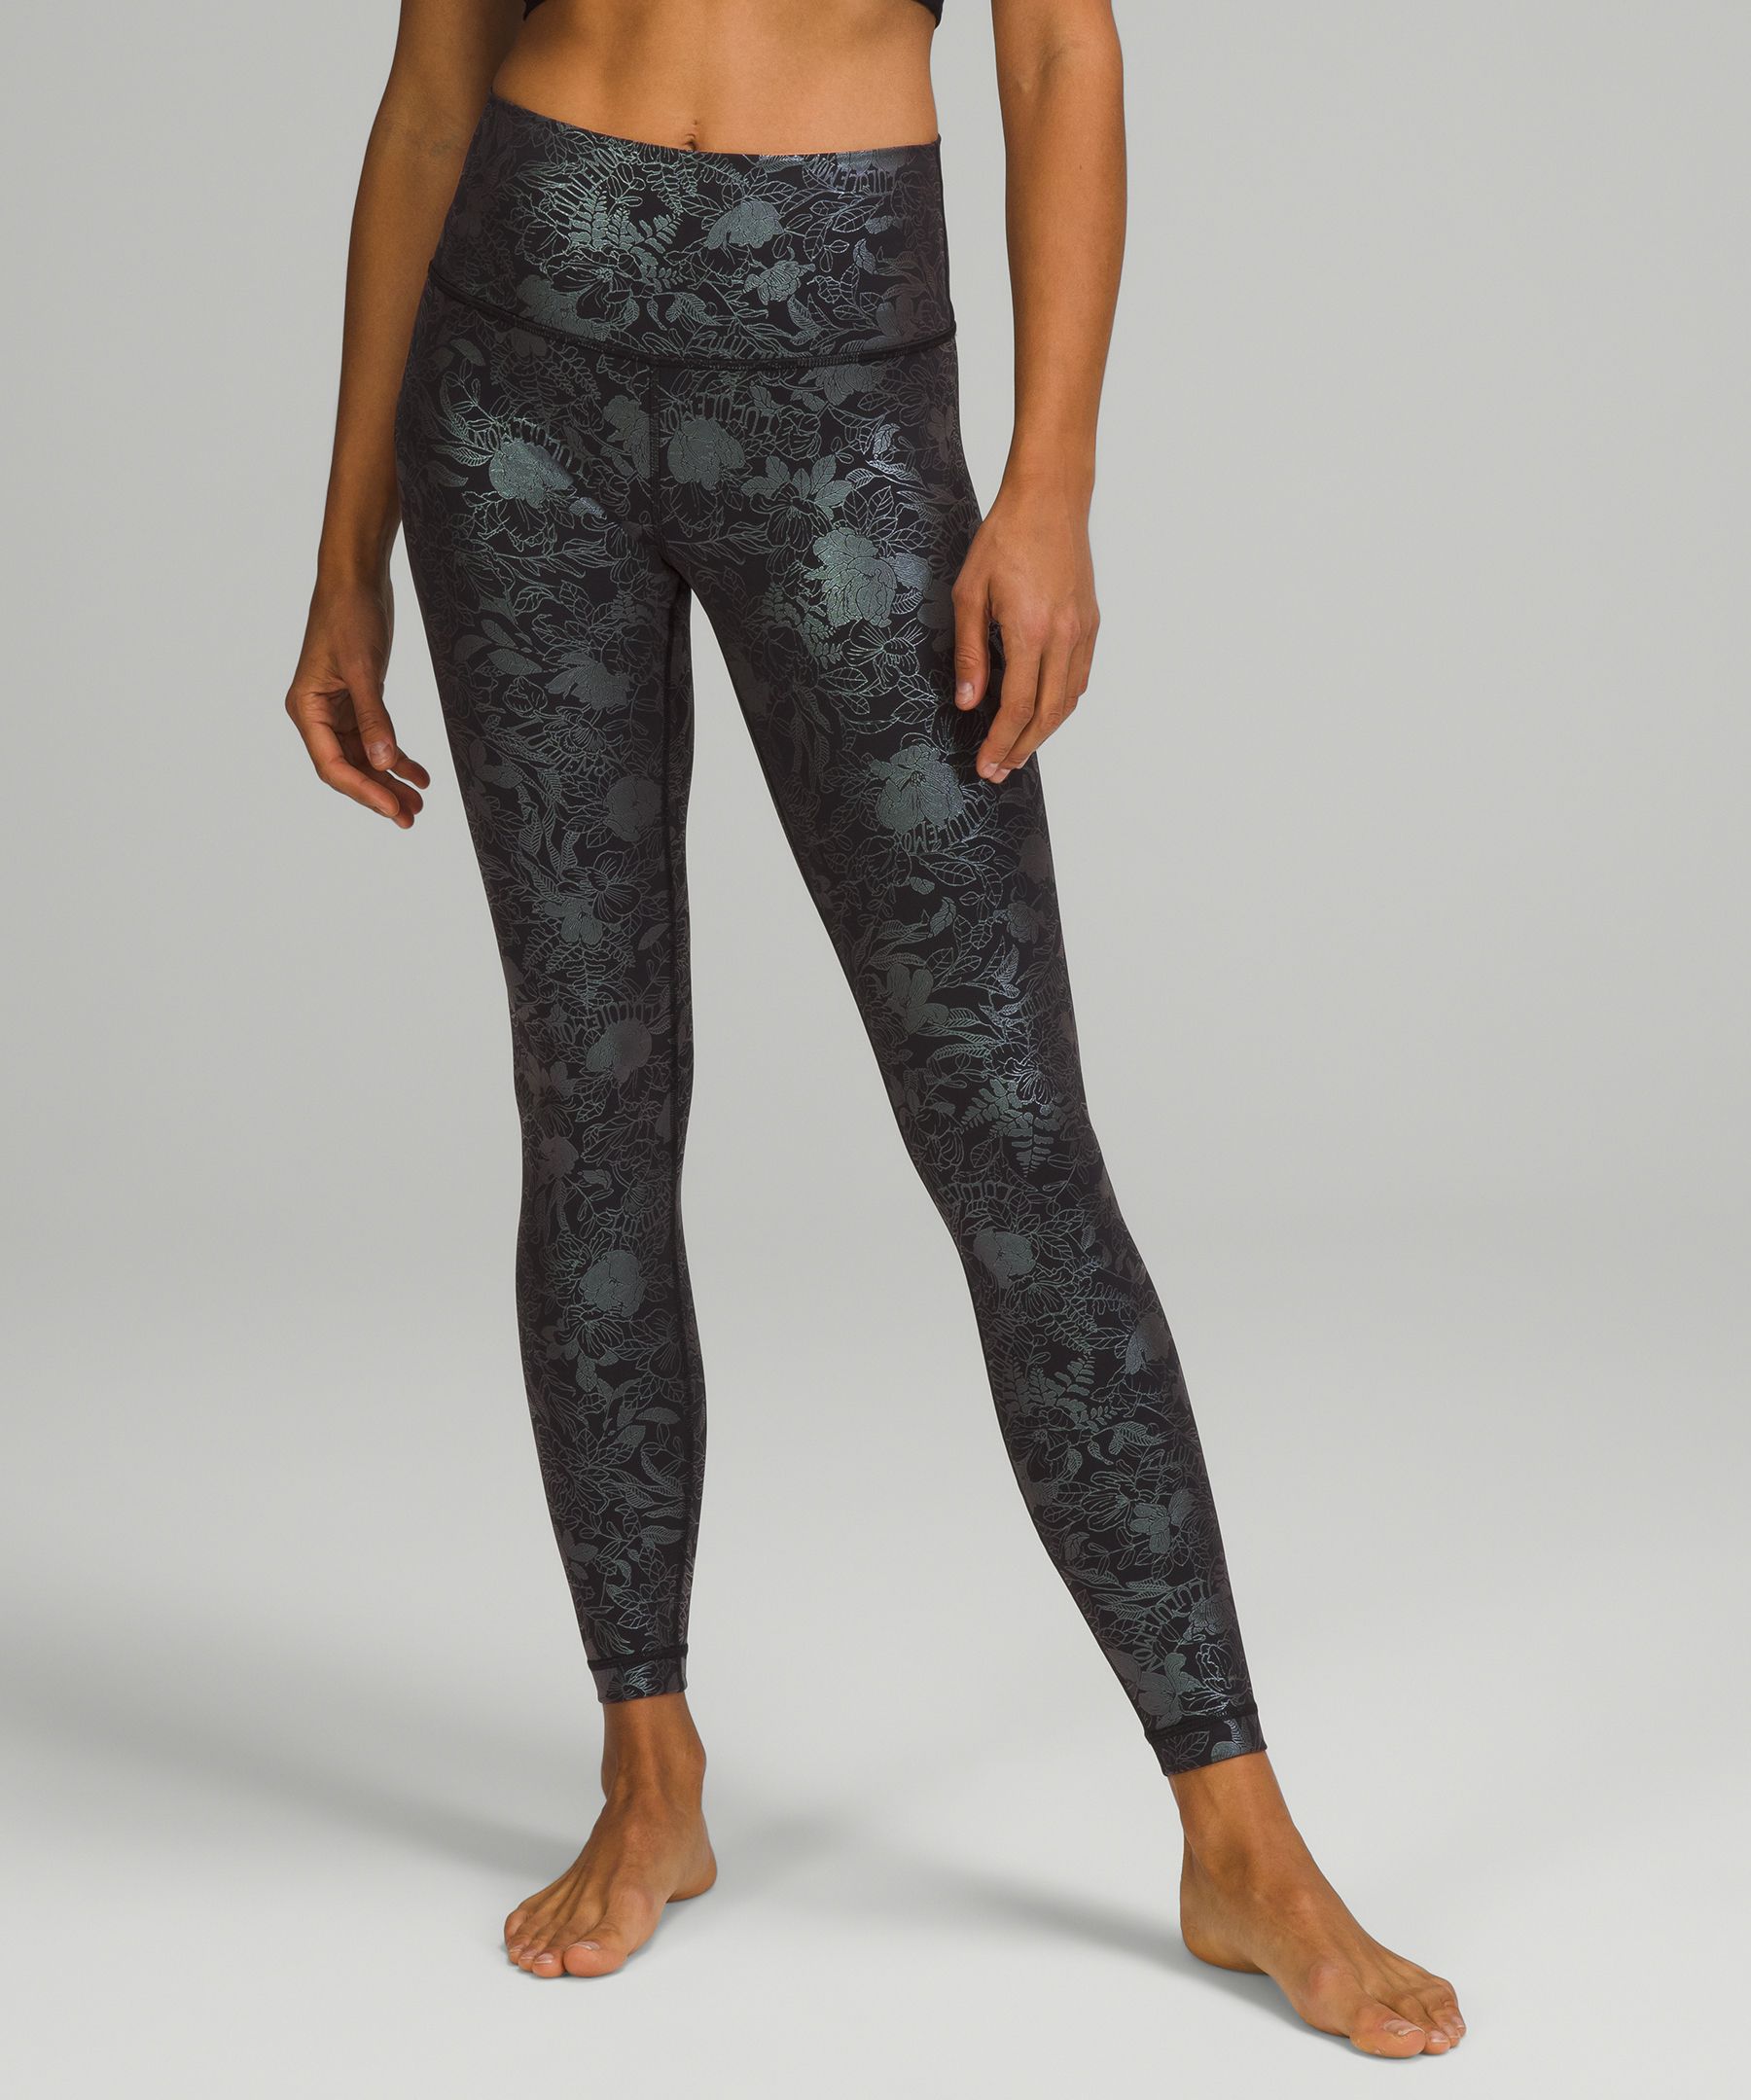 Wunder Under High-Rise Tight 28 *Full-On Luxtreme Shine